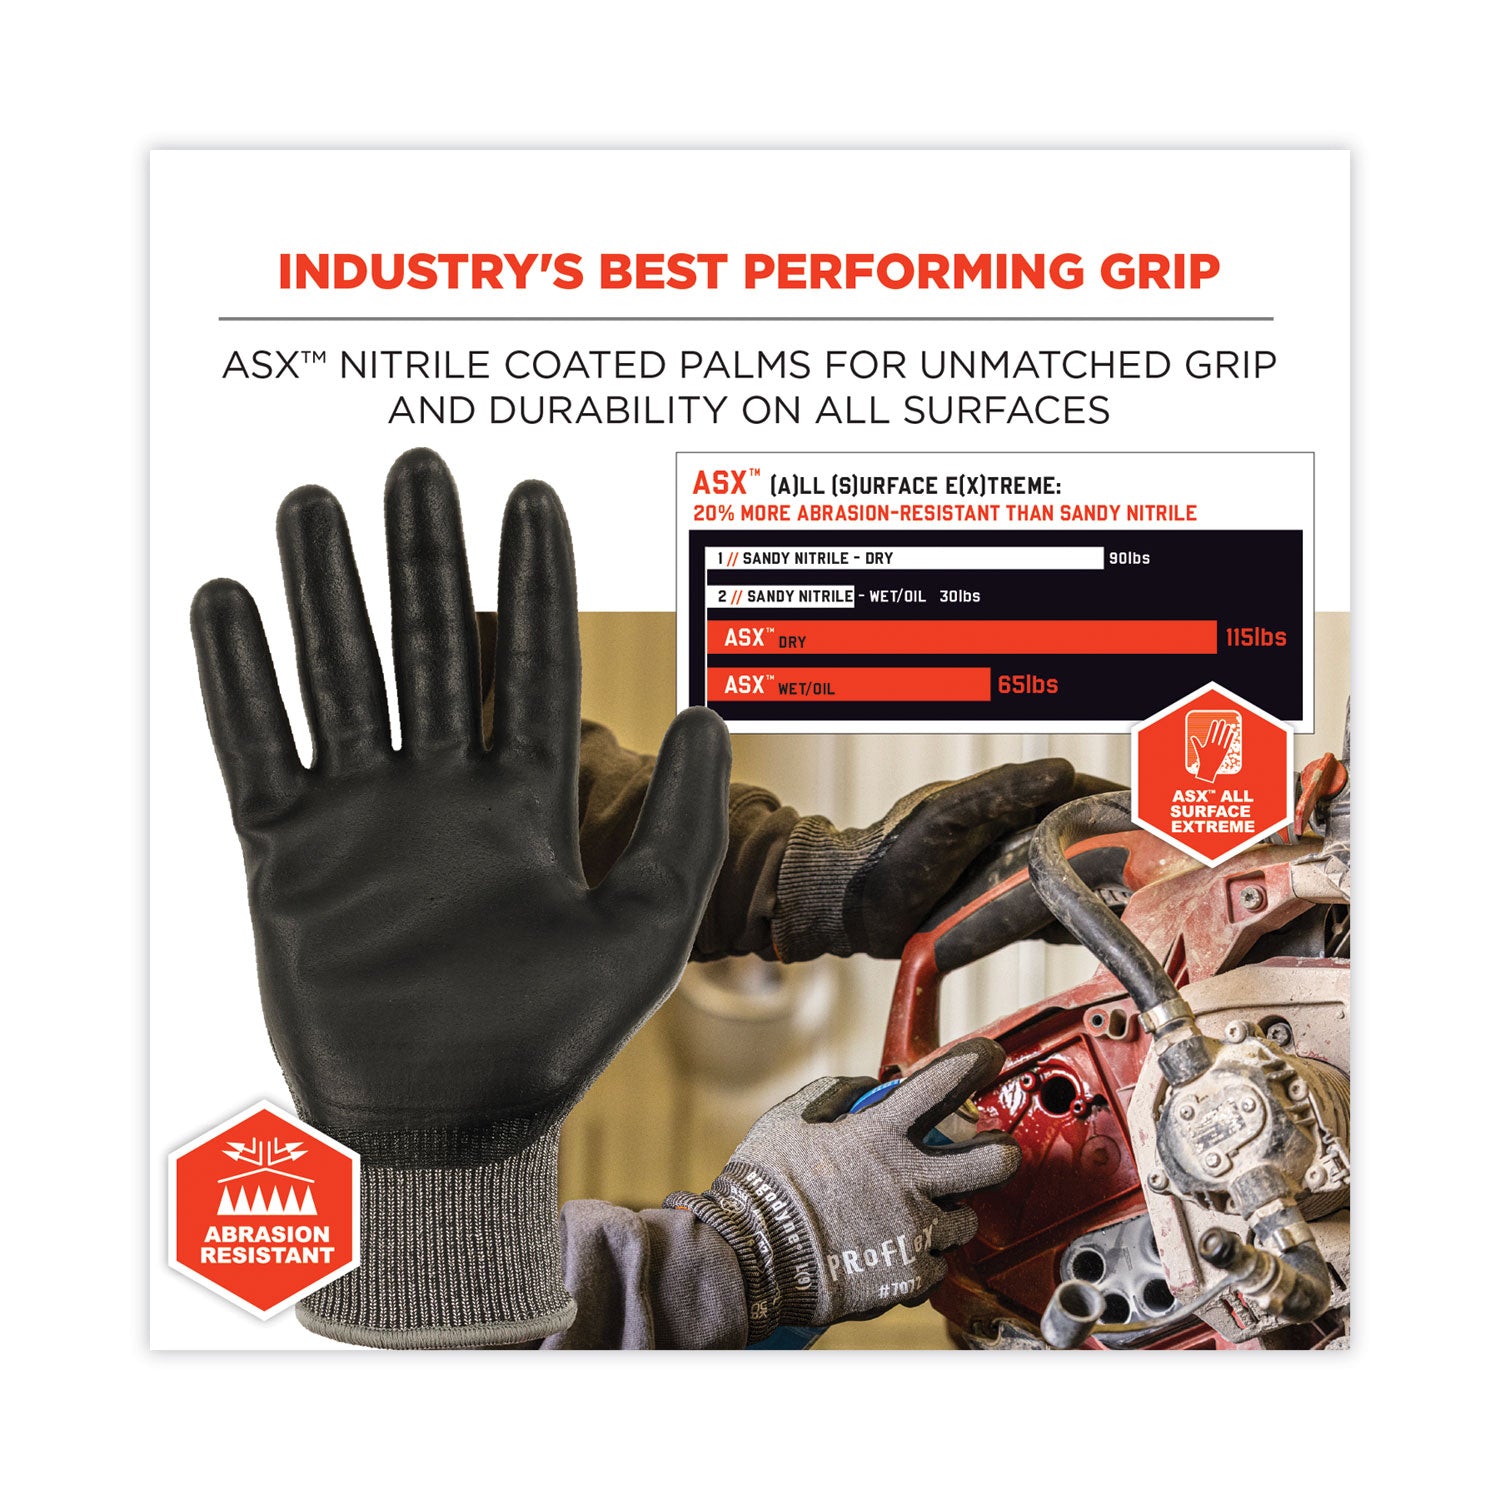 proflex-7072-ansi-a7-nitrile-coated-cr-gloves-gray-medium-12-pairs-pack-ships-in-1-3-business-days_ego10303 - 3